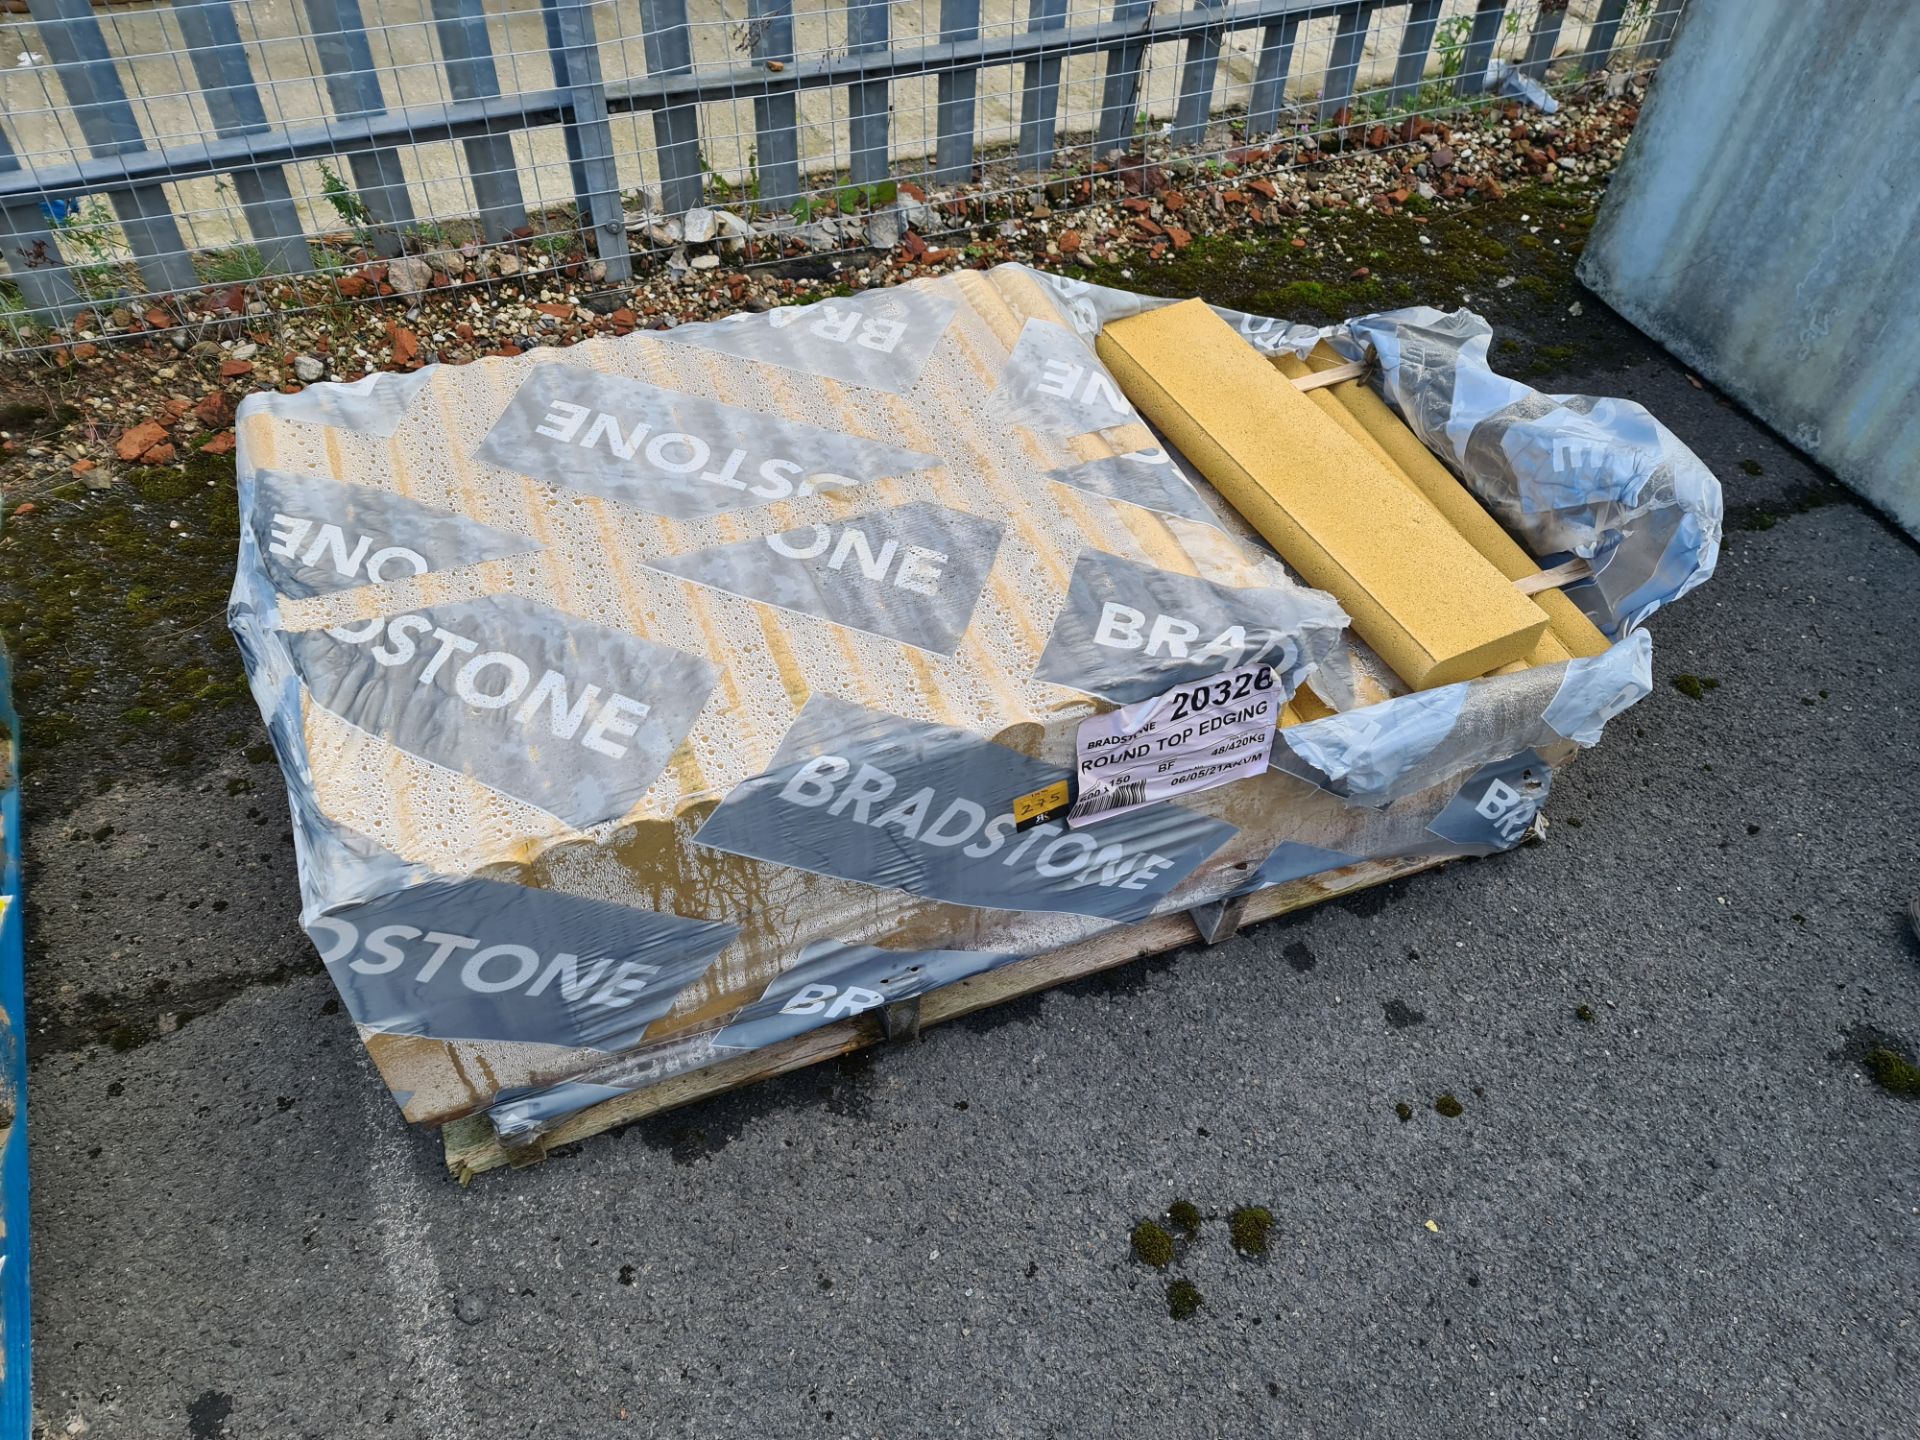 Pallet of Bradstone round top edging size 600 x 150 mm. As can be seen in the photos, the pallet is